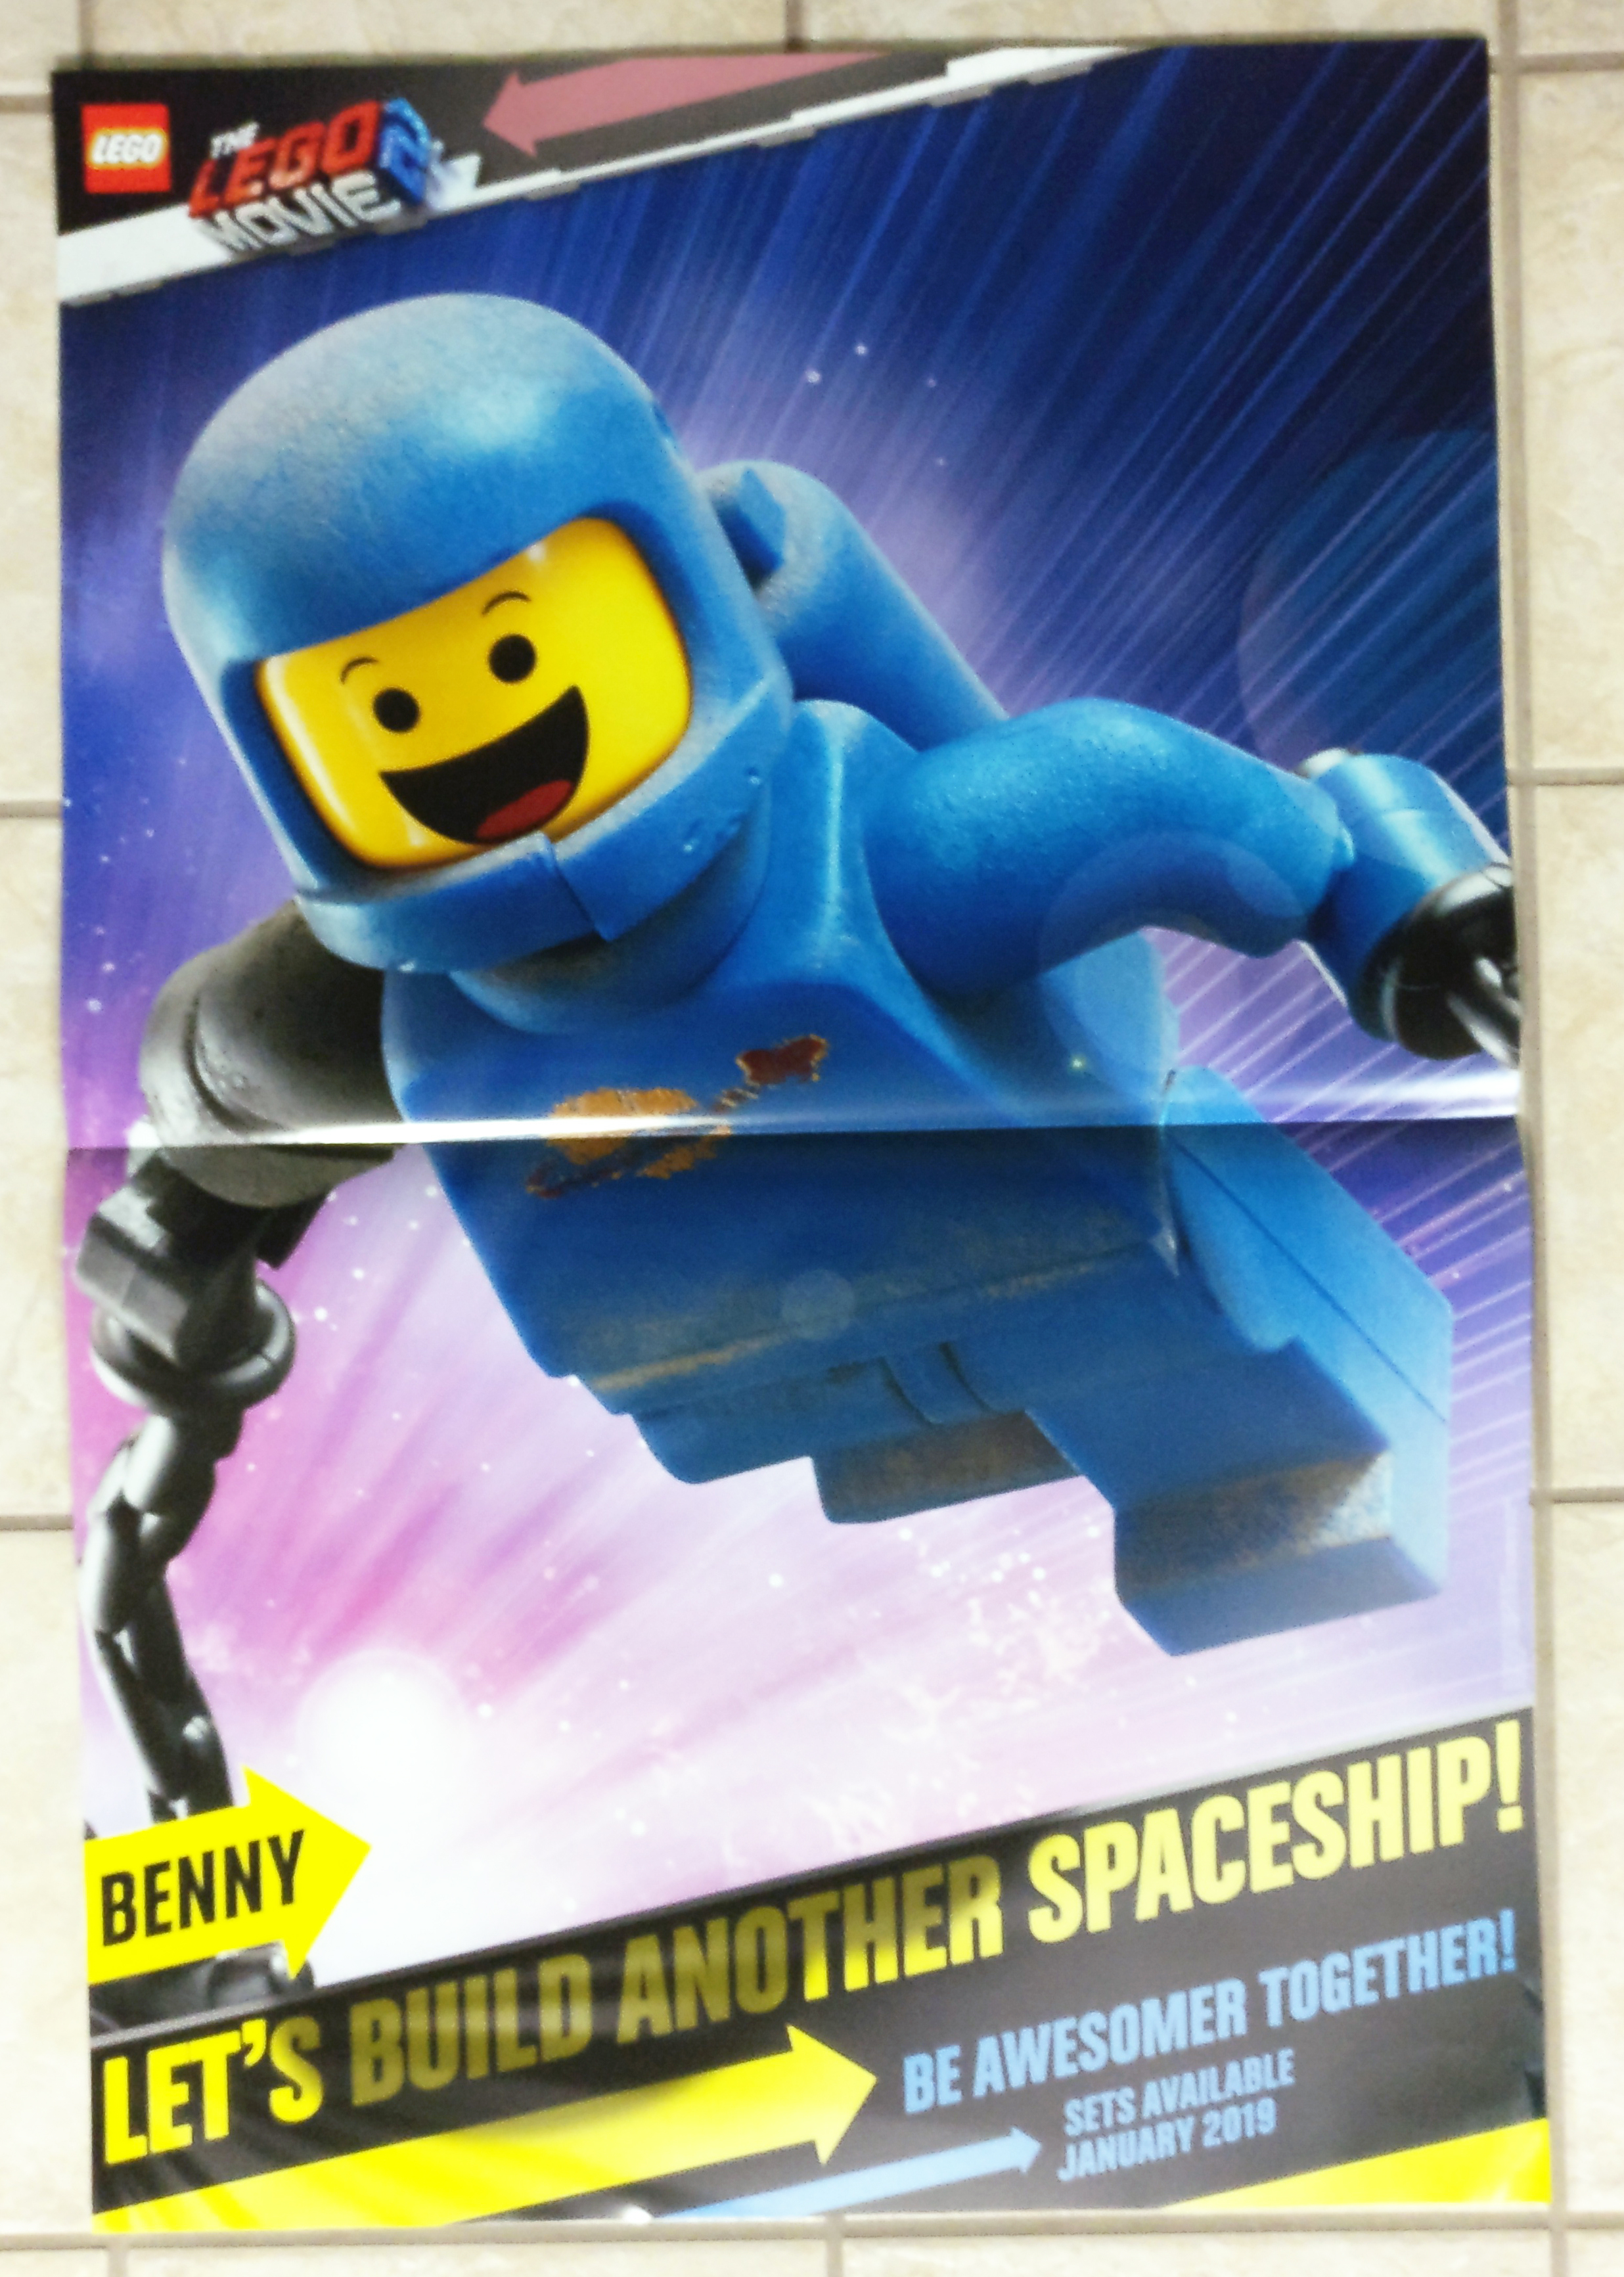 The Lego Movie 2 Characters Large Poster Art Print